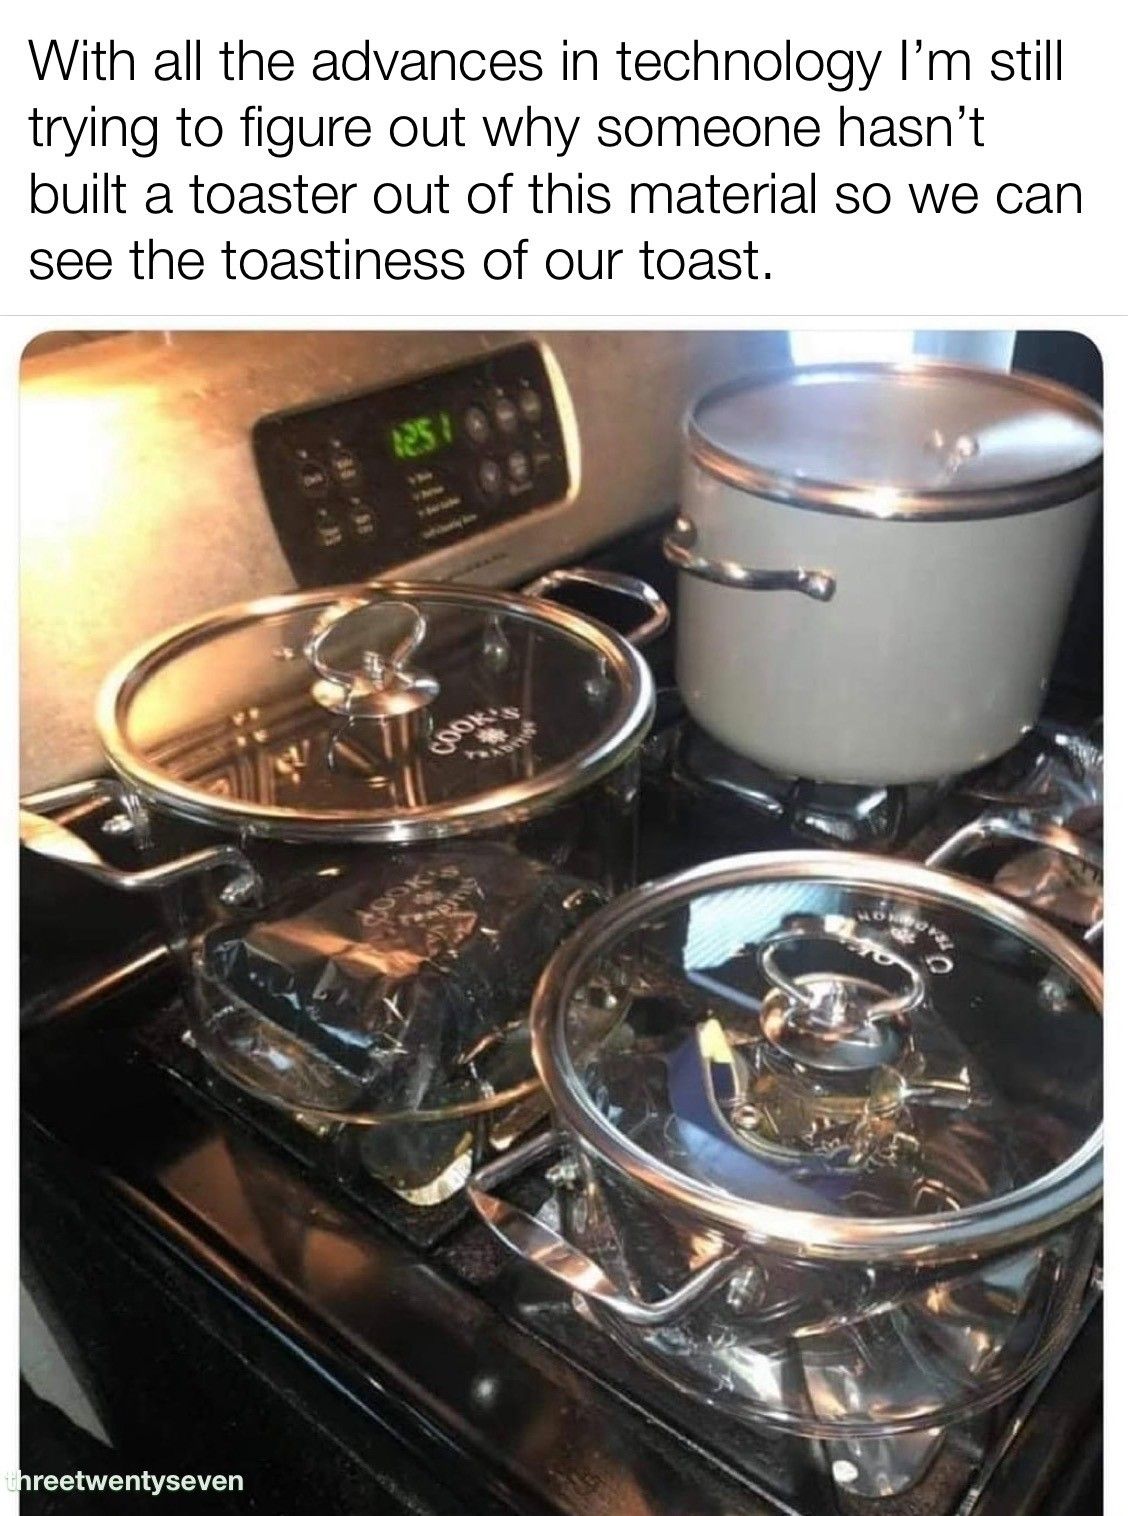 "The Toastiness of Our Toast"